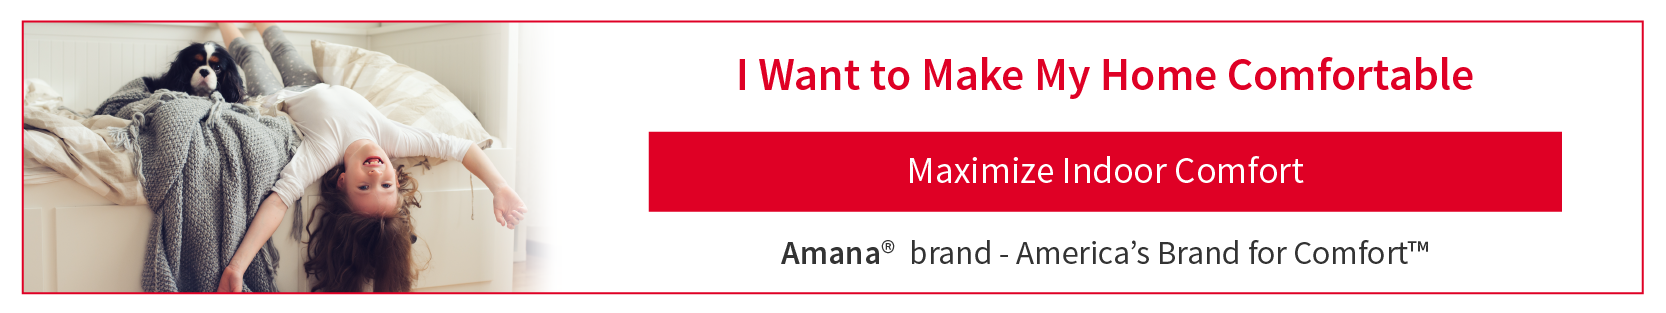 Amana brand heating and cooling